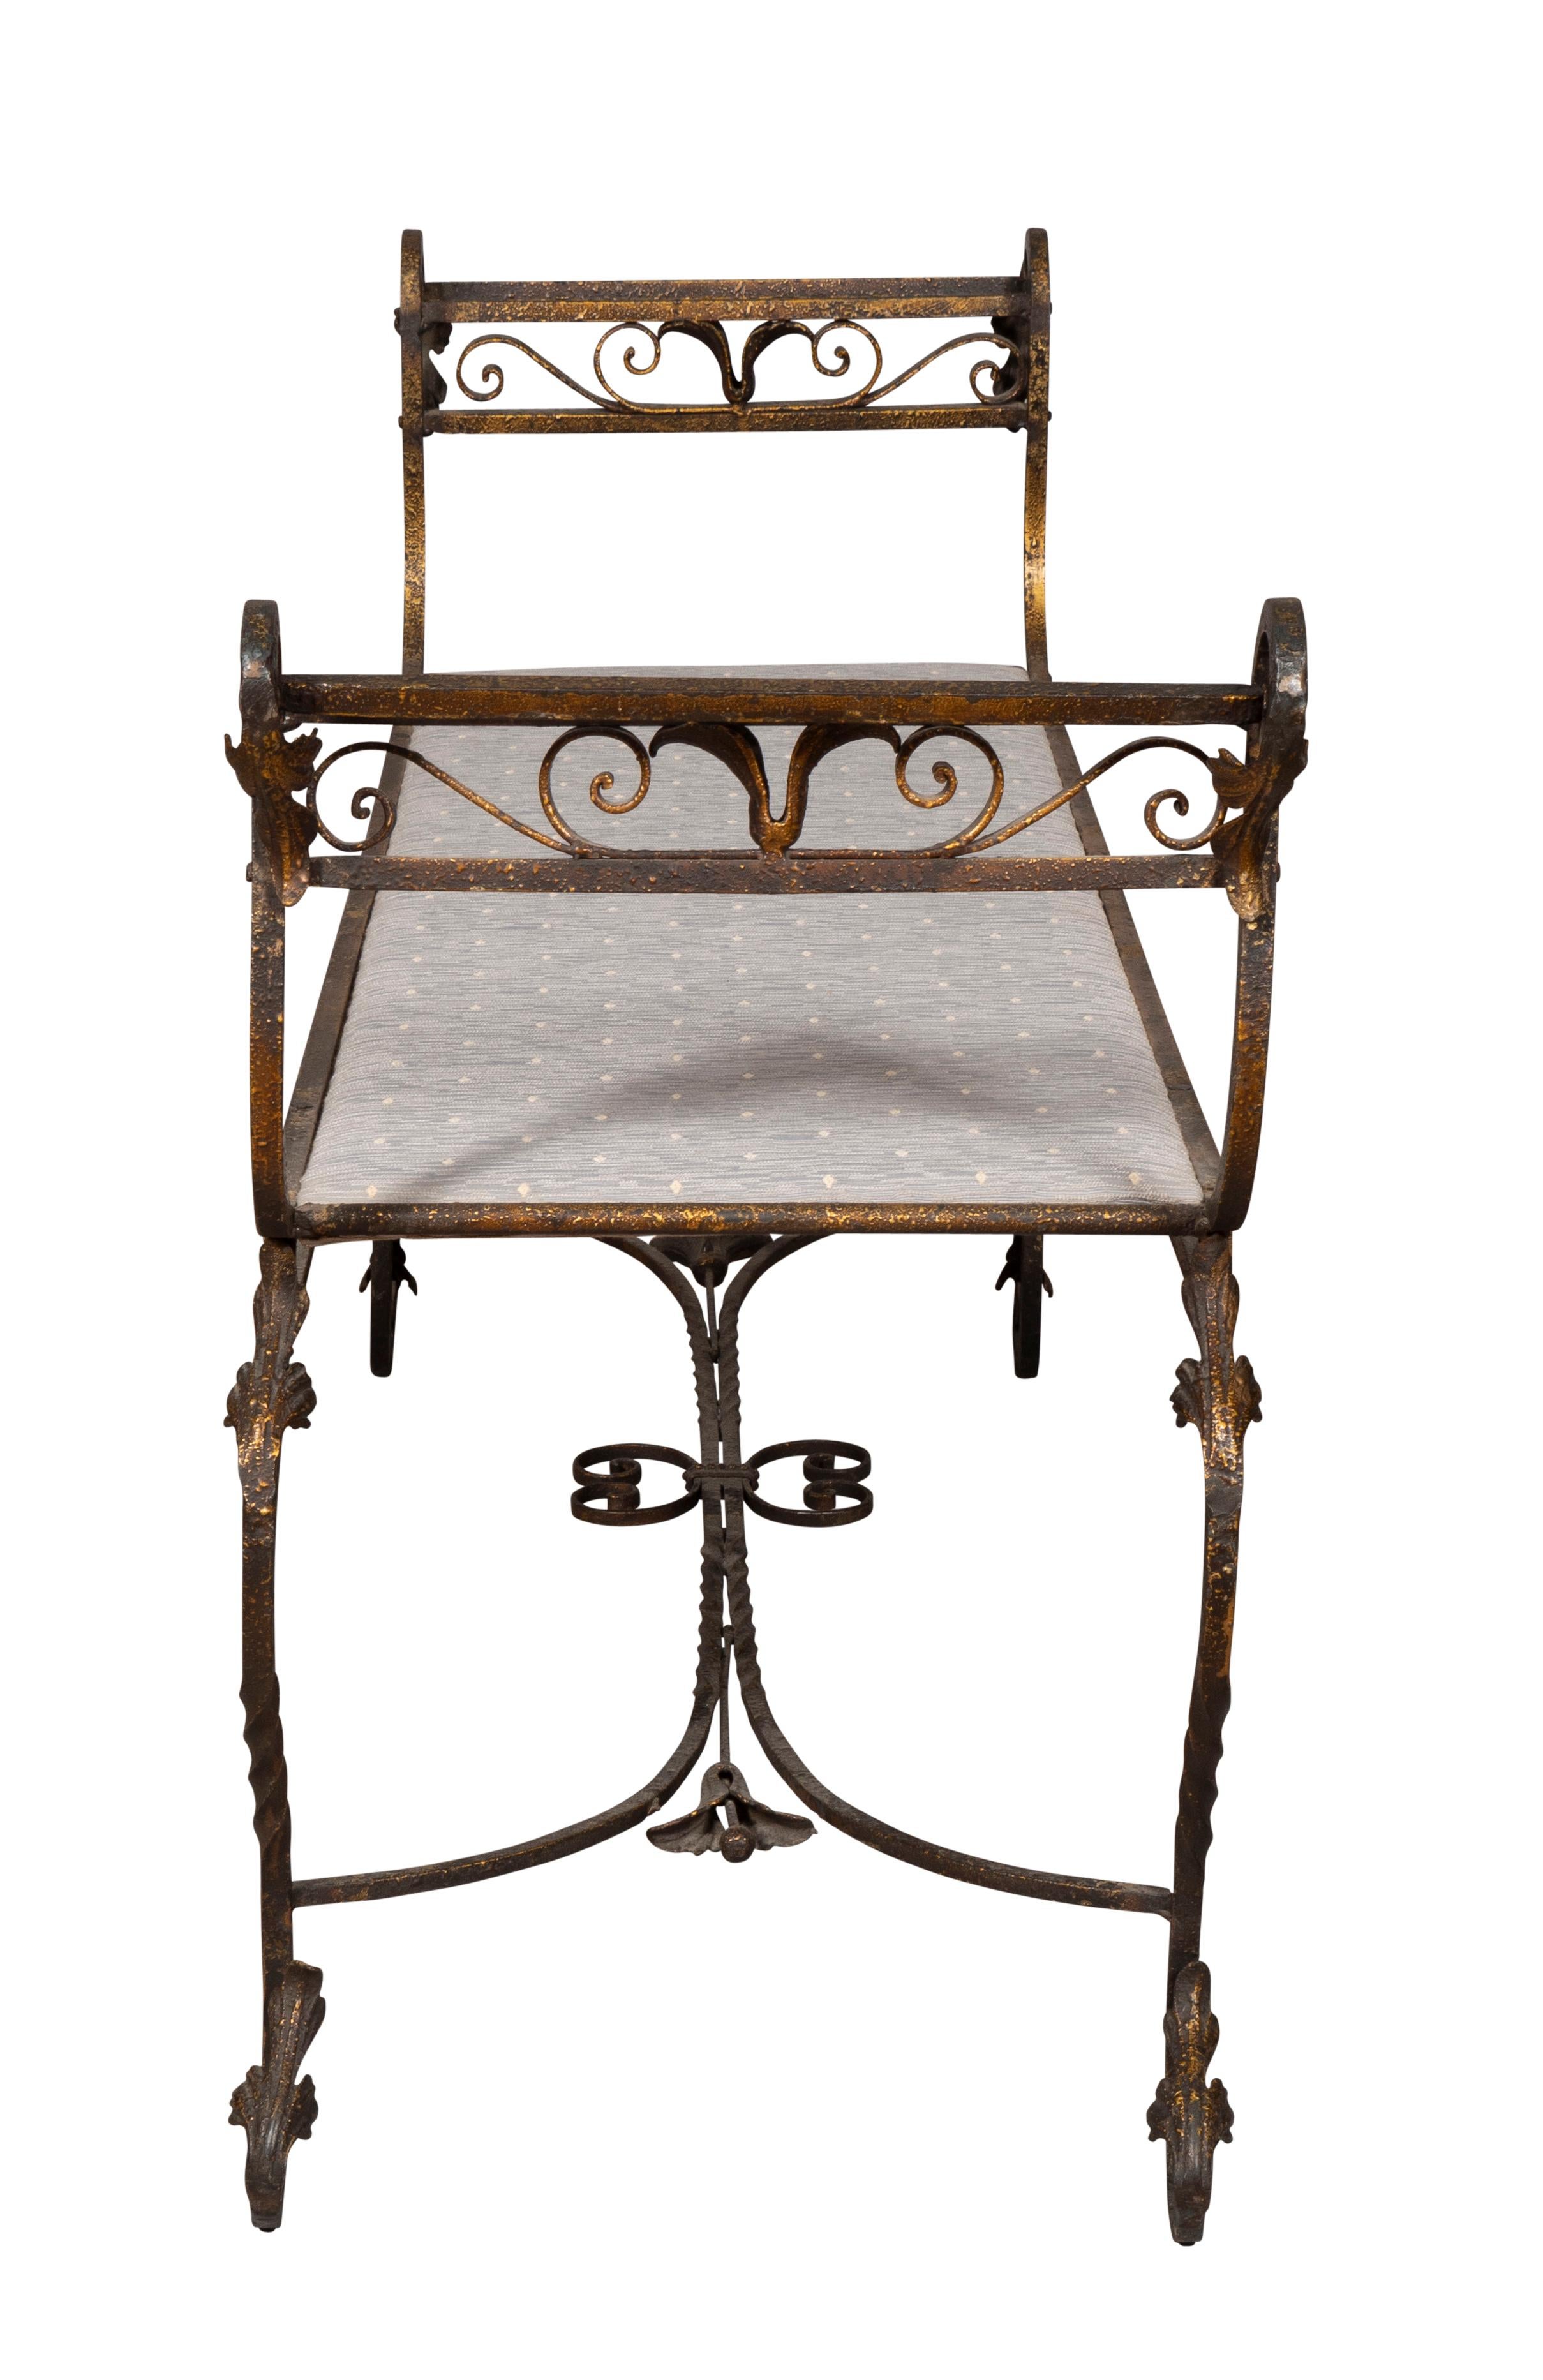 20th Century American Wrought Iron Bench For Sale